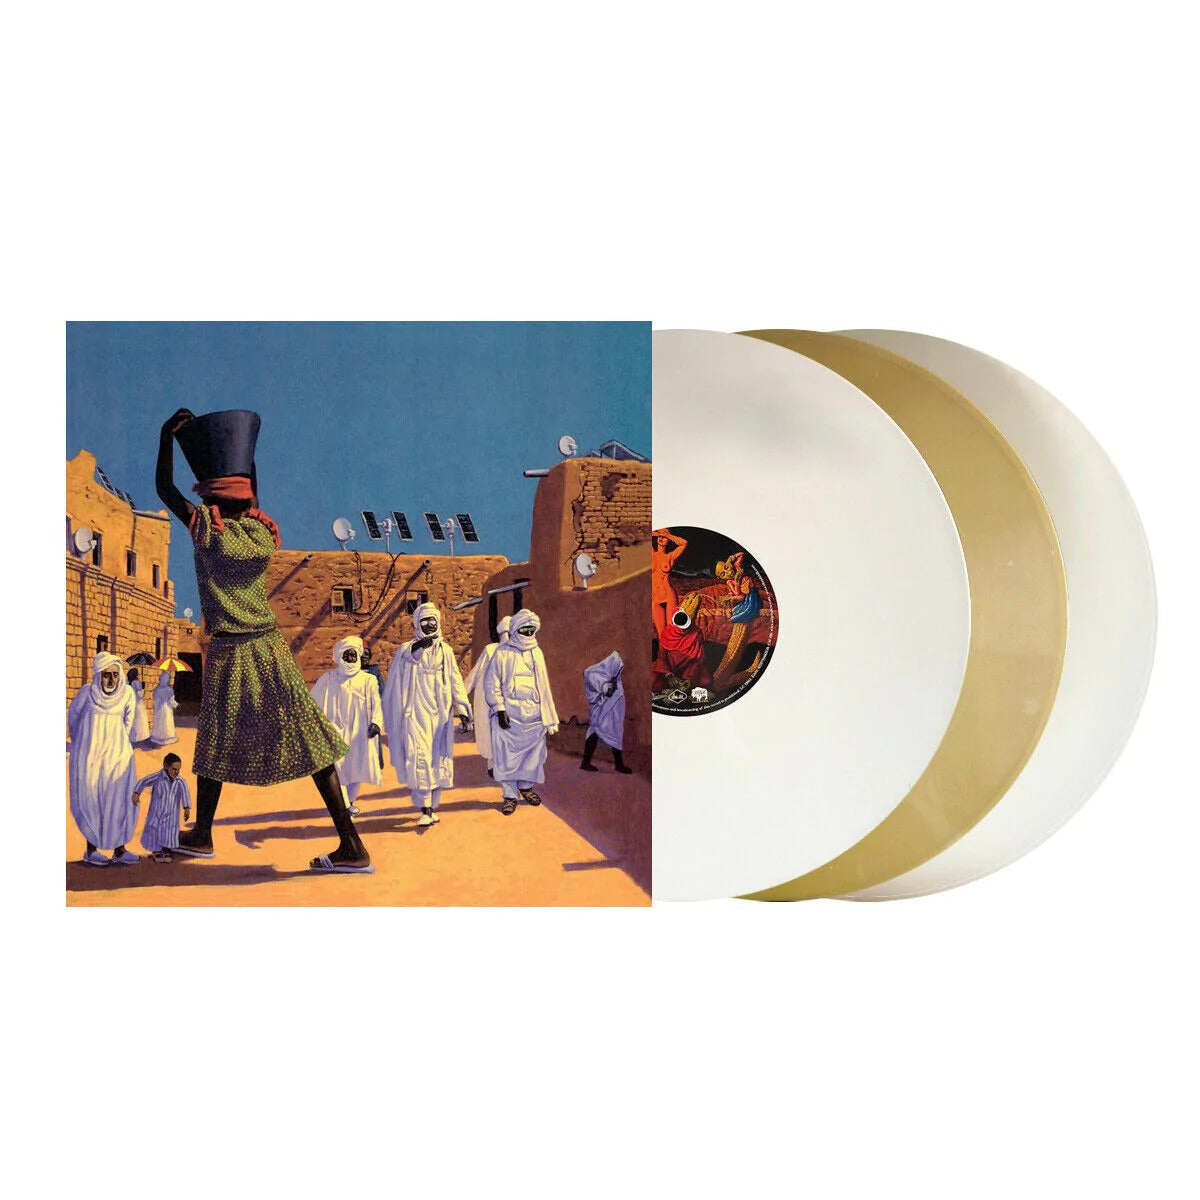 The Mars Volta - The Bedlam In Goliath 3LP (Limited Edition White, Gold & Glow In The Dark Vinyl)